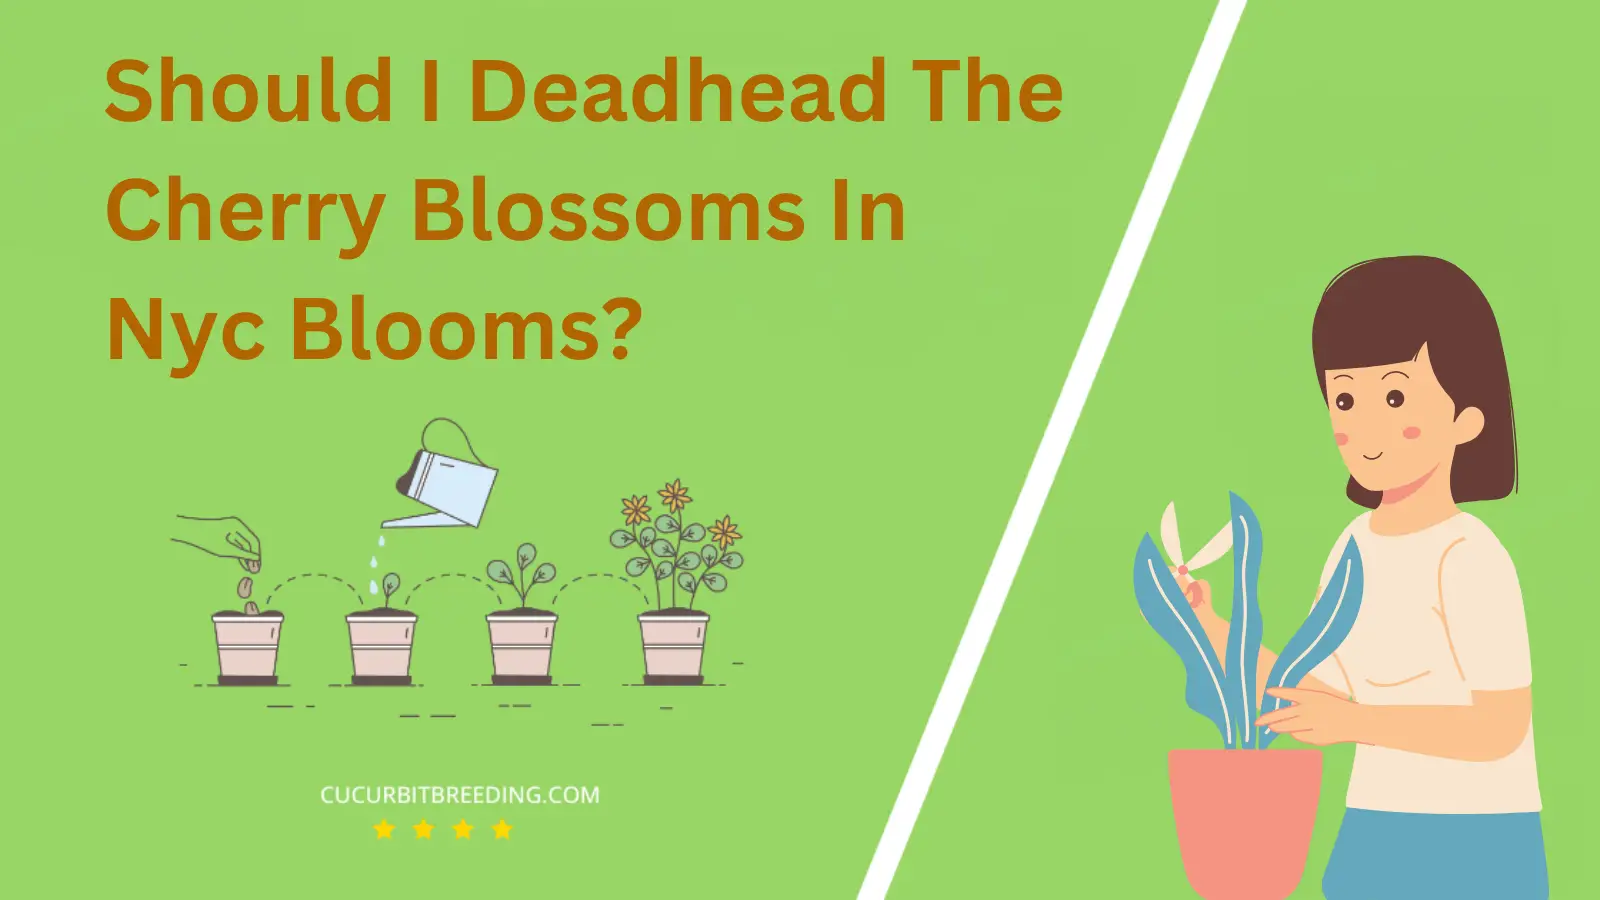 Should I Deadhead The Cherry Blossoms In Nyc Blooms?